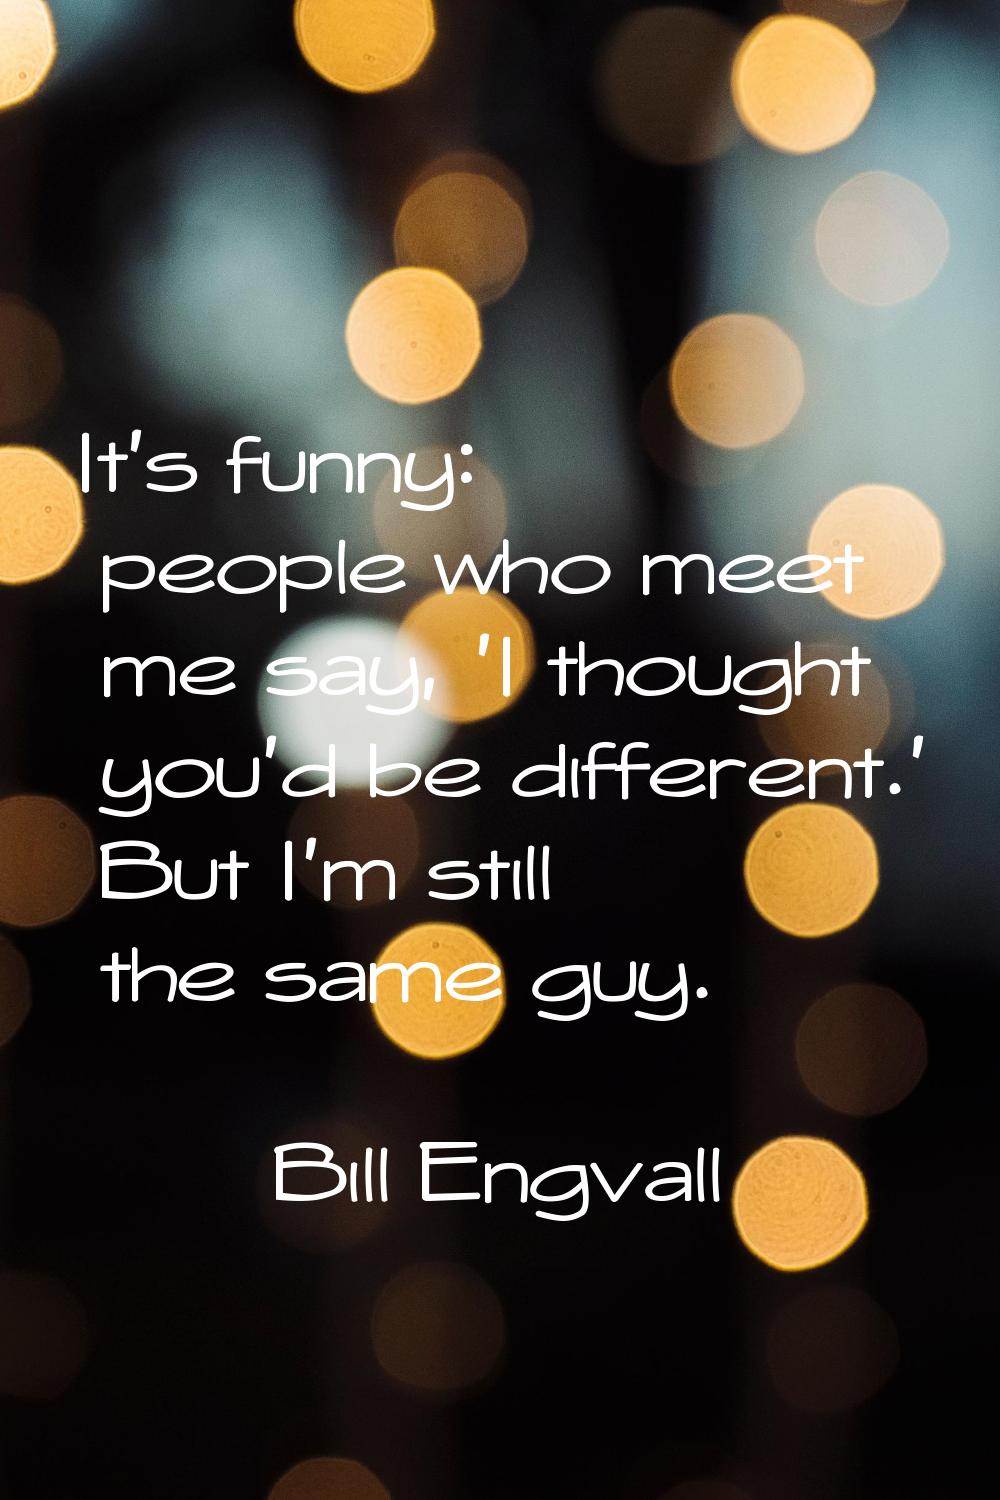 It's funny: people who meet me say, 'I thought you'd be different.' But I'm still the same guy.